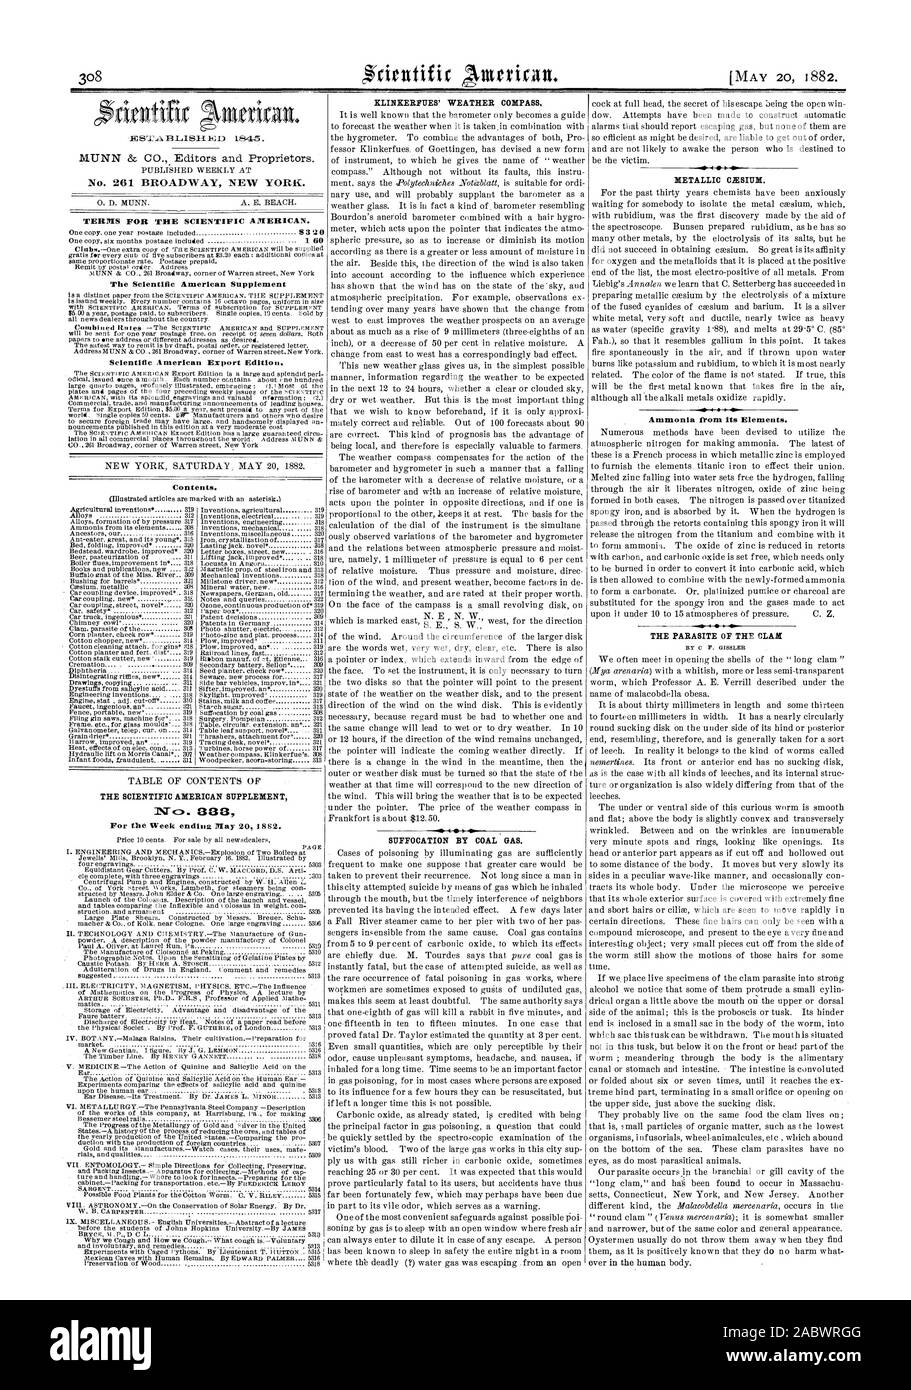 [MAY 20 1882. TERRIS FOR THE SCIENTIFIC AMERICAN. 2 The Scientific American Supplement Scientific American Export Edition. 'Contents. THE SCIENTIFIC AMERICAN SUPPLEMENT KLINRERFIJES' WEATHER COMPASS. SUFFOCATION BY COAL GAS. METALLIC CESIUM. Ammonia from its Elements. THE PARASITE OF THE CLAM, 1882-05-20 Stock Photo